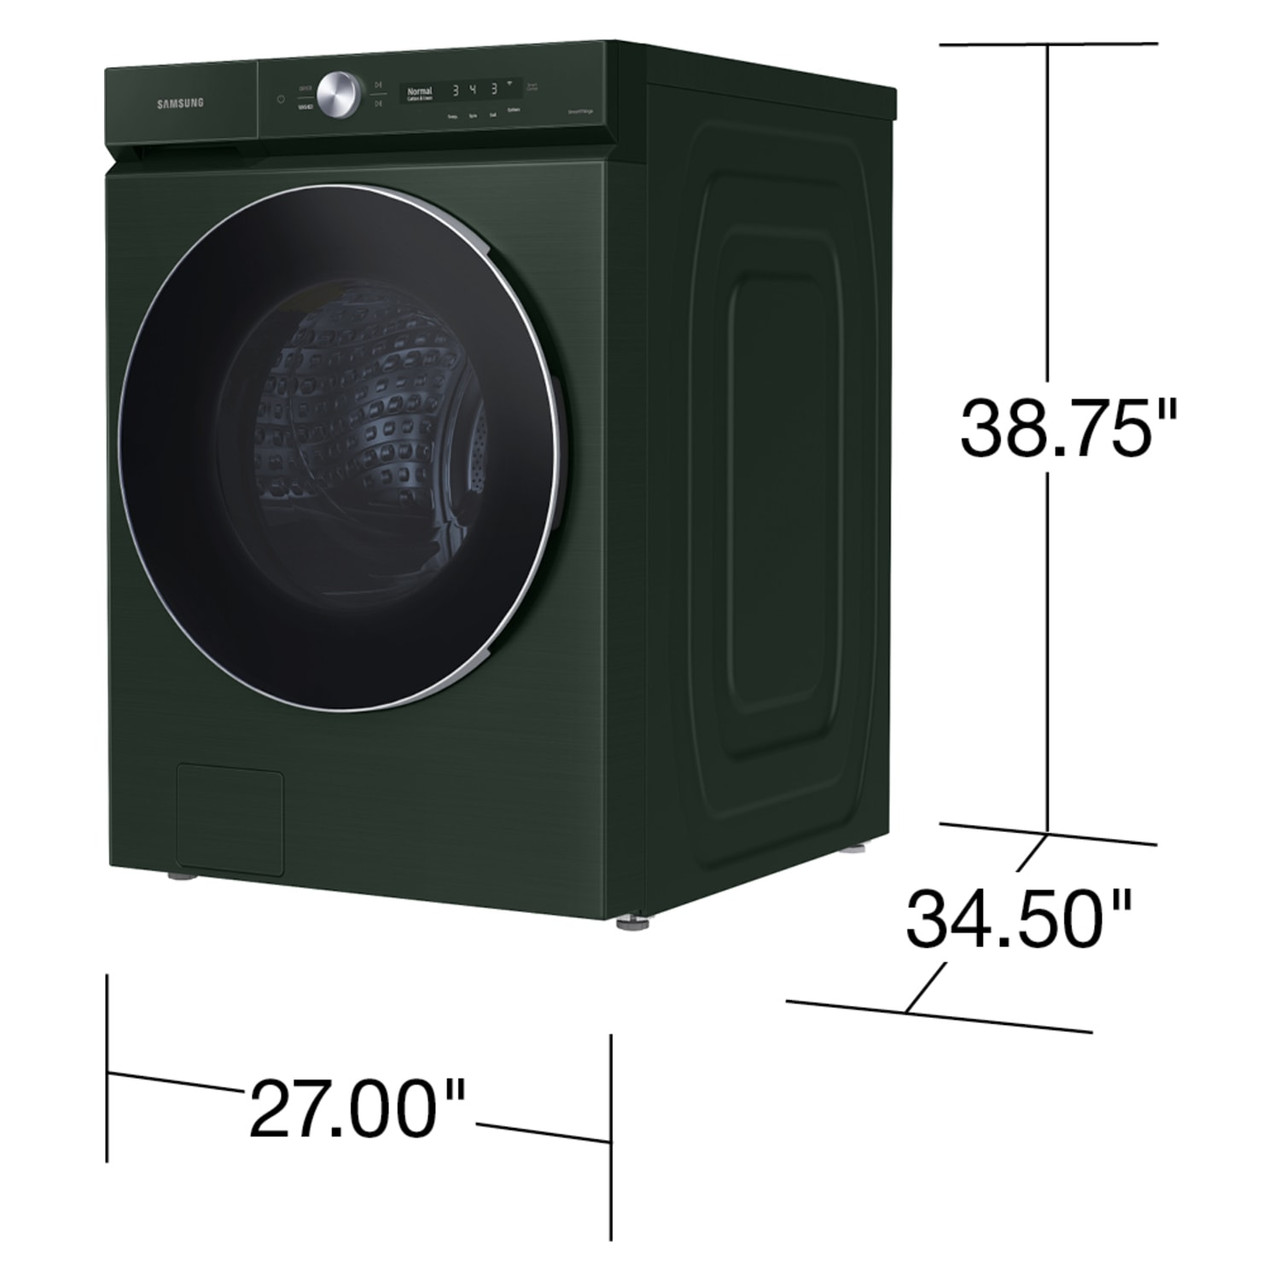 The Samsung Bespoke Ultra Capacity Front Loading Washer and Dryer